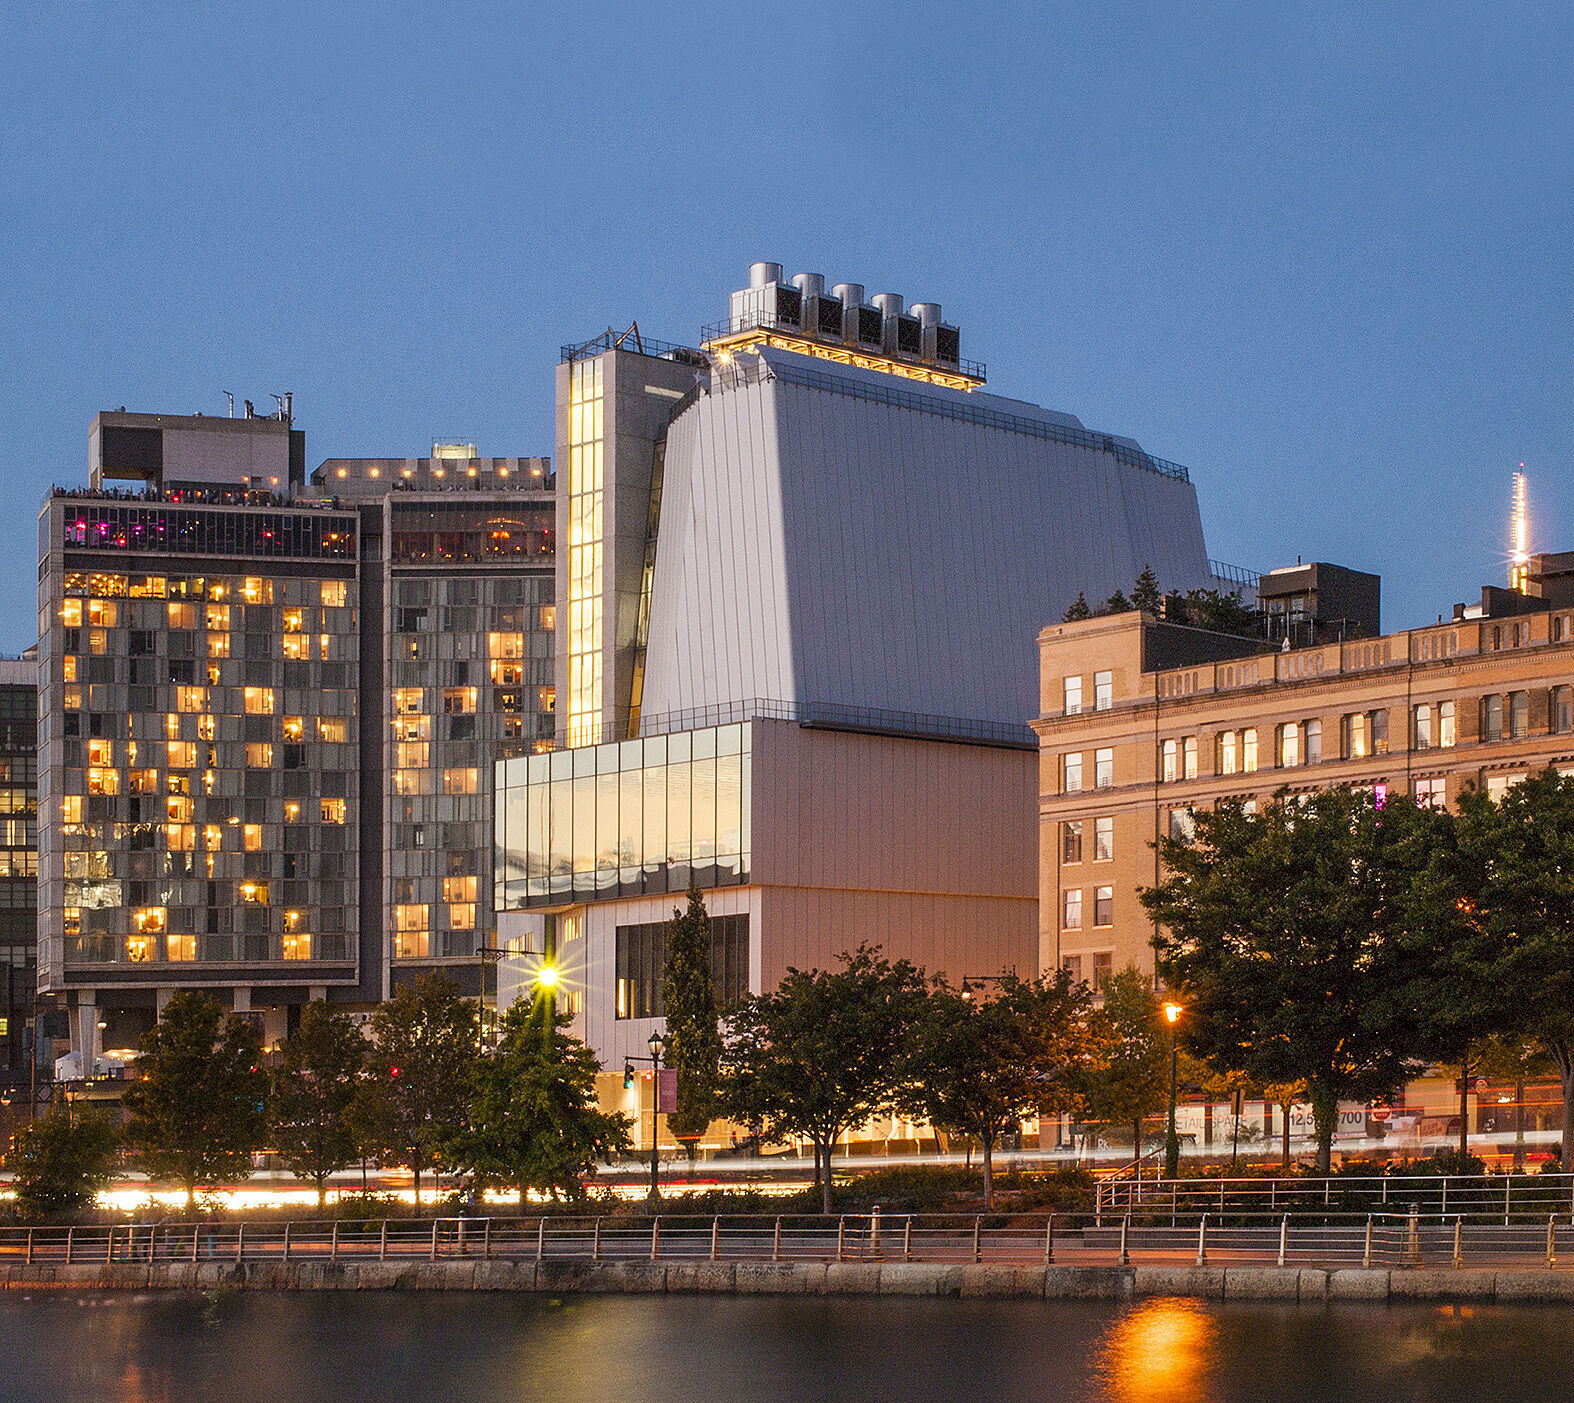 Whitney Museum of American Art and surrounding buildings with sunset light hitting their facades. The river is visible in front of the buildings, and the sky is bright.